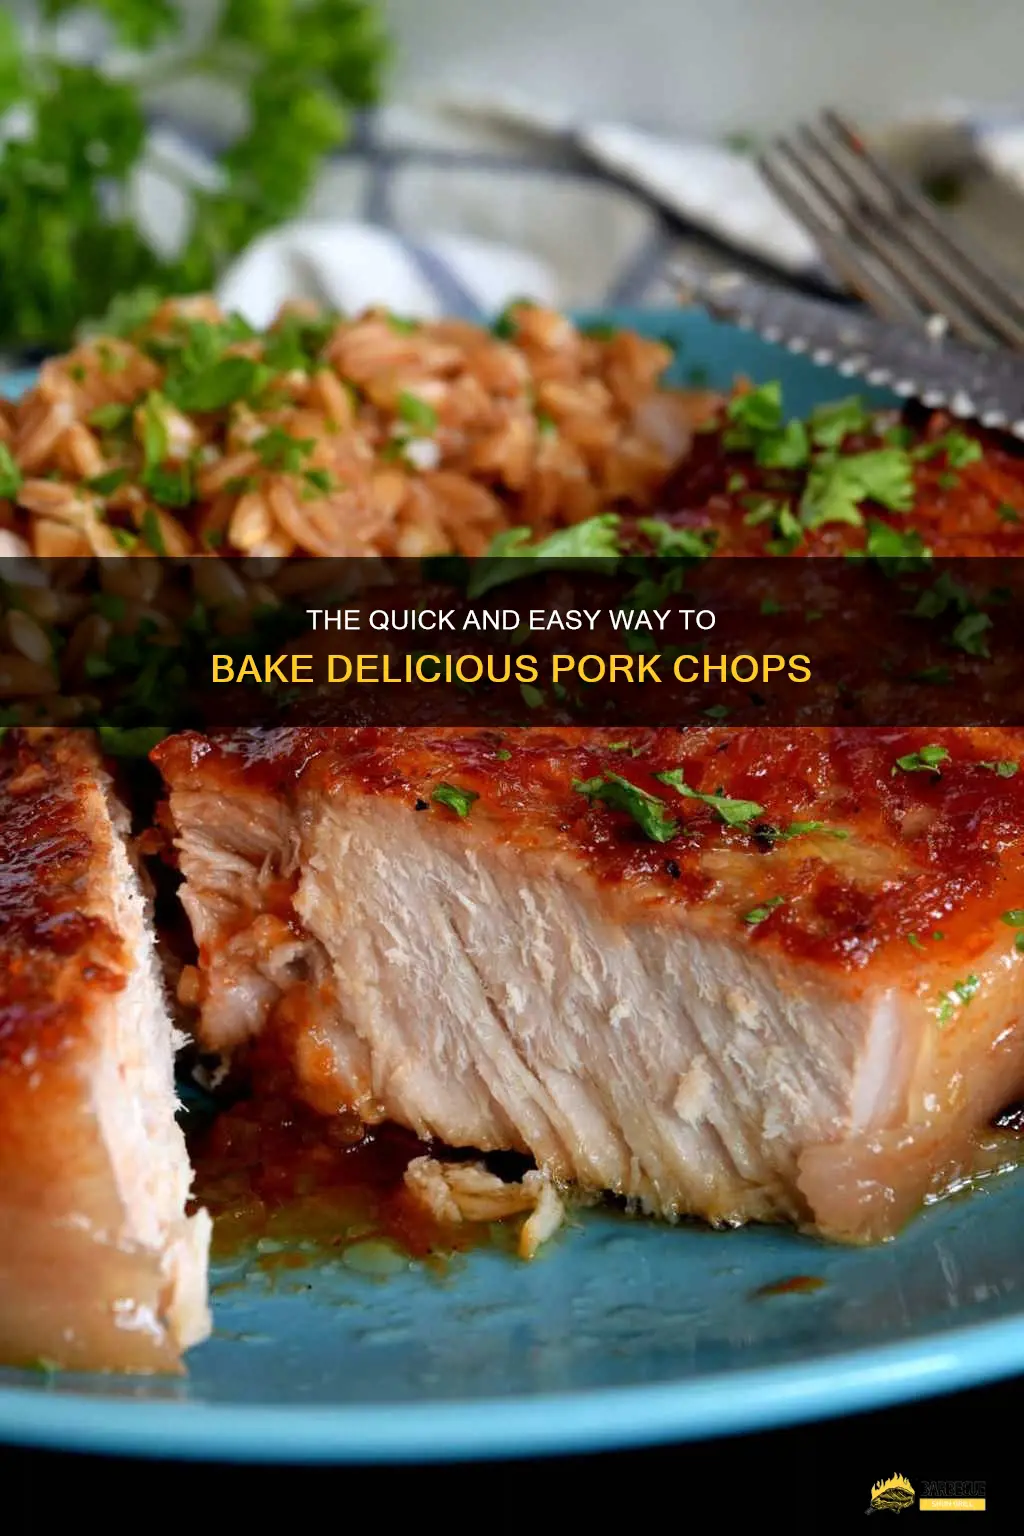 The Quick And Easy Way To Bake Delicious Pork Chops | ShunGrill